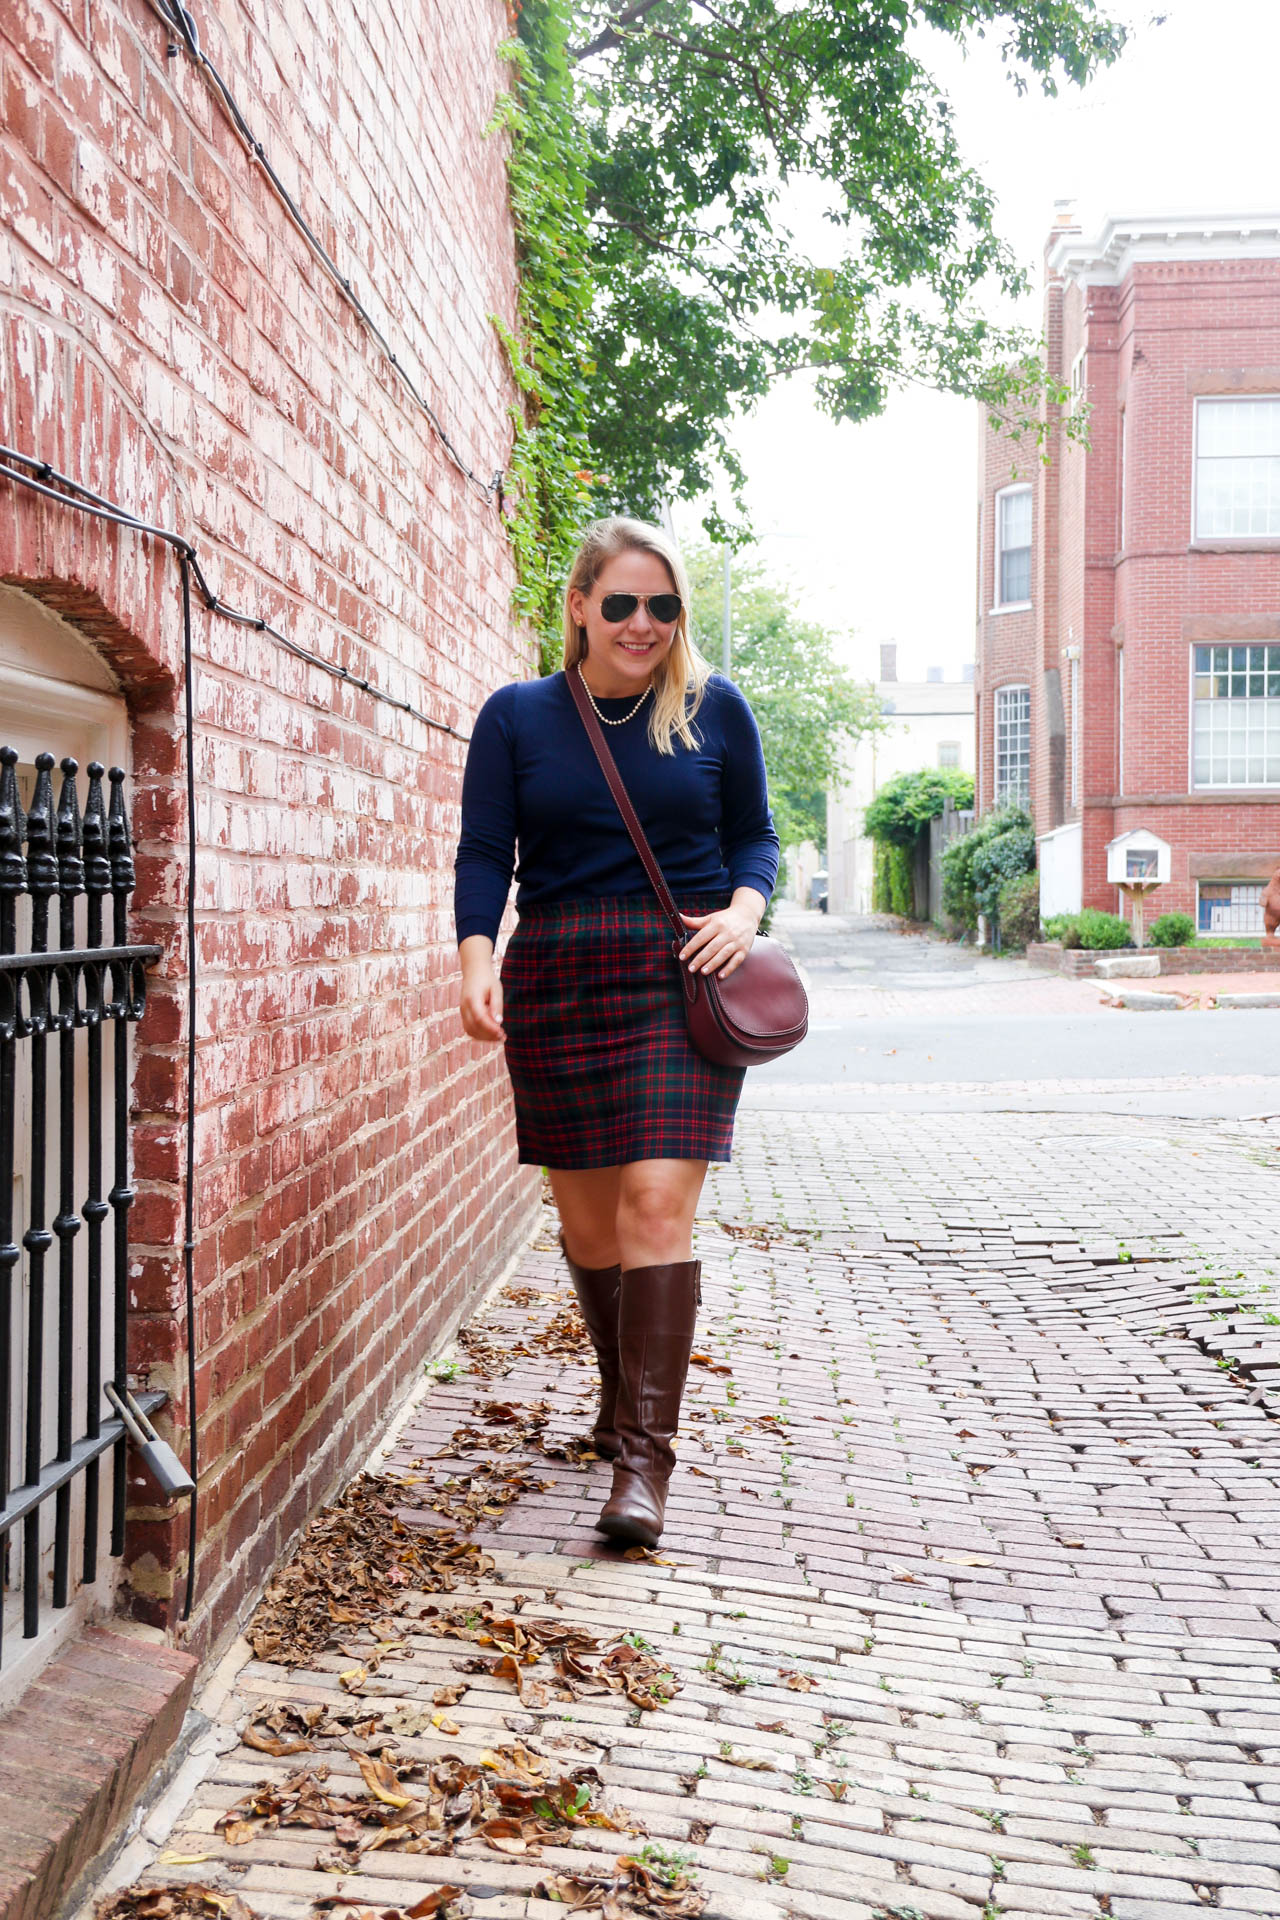 J.Crew Tippi Sweater | @dcgirlinpearls